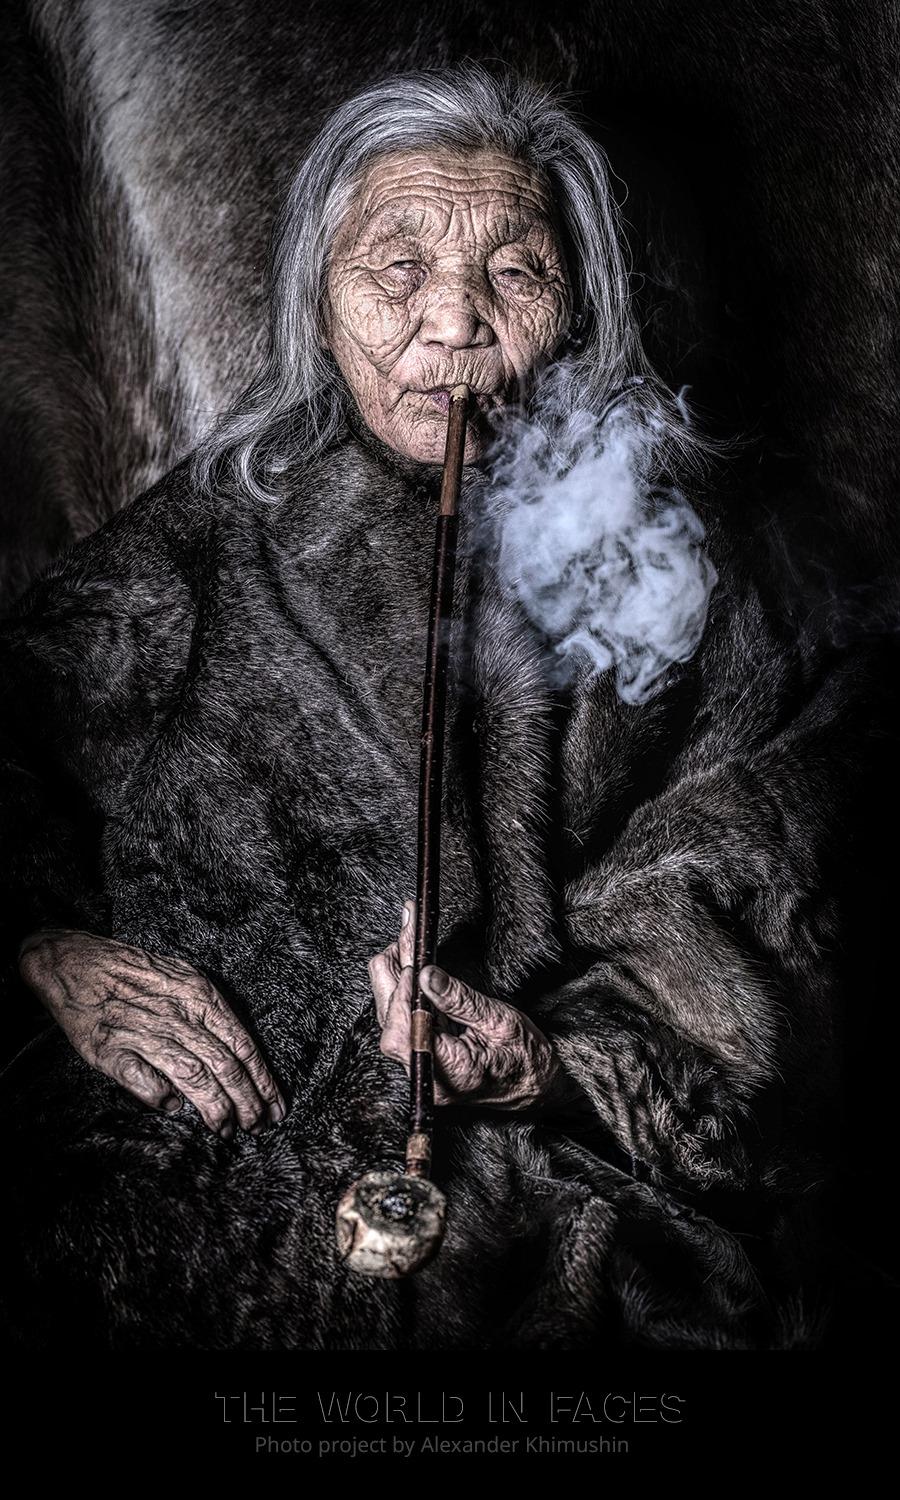 A portrait of Dukha Elder Ulzii Sandag from Darkhad Valley, Northern Mongolia (© <a href="https://www.facebook.com/xperimenter">Alexander Khimushin</a> / The World In Faces)